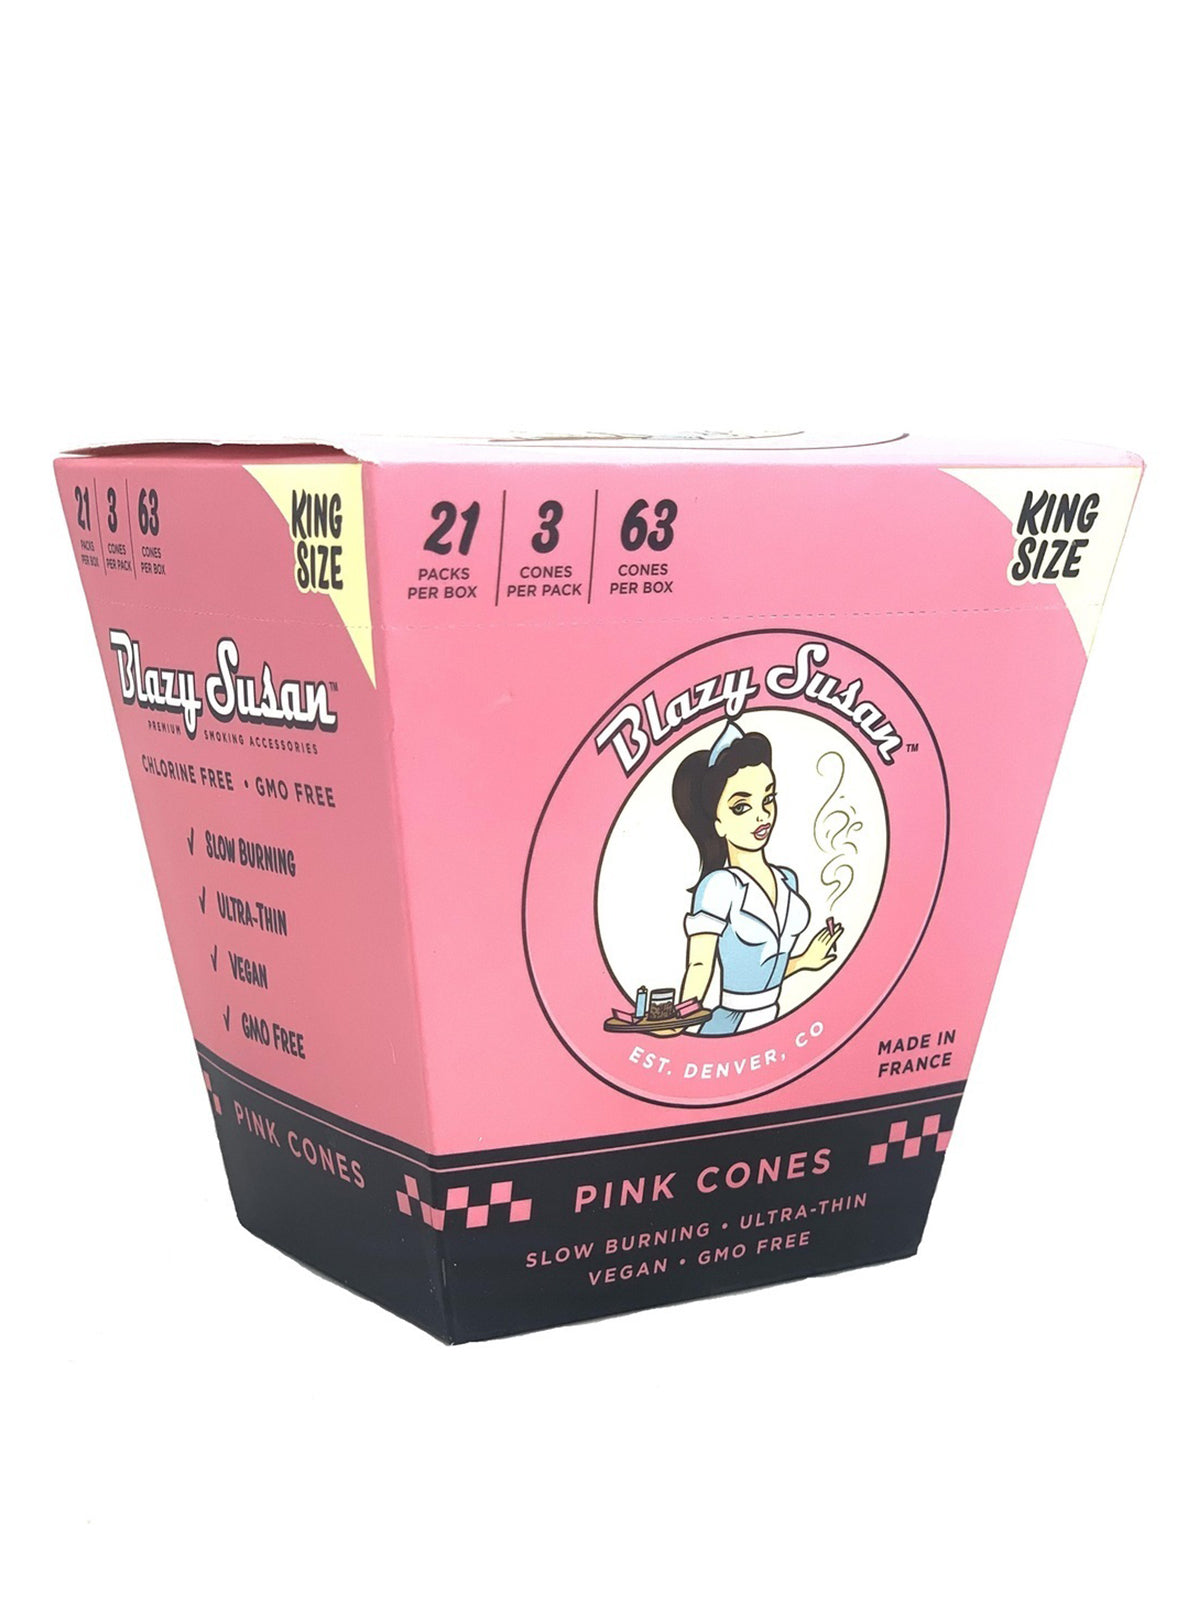 Blazy Susan Pink Rolled Cones King Size 21pk